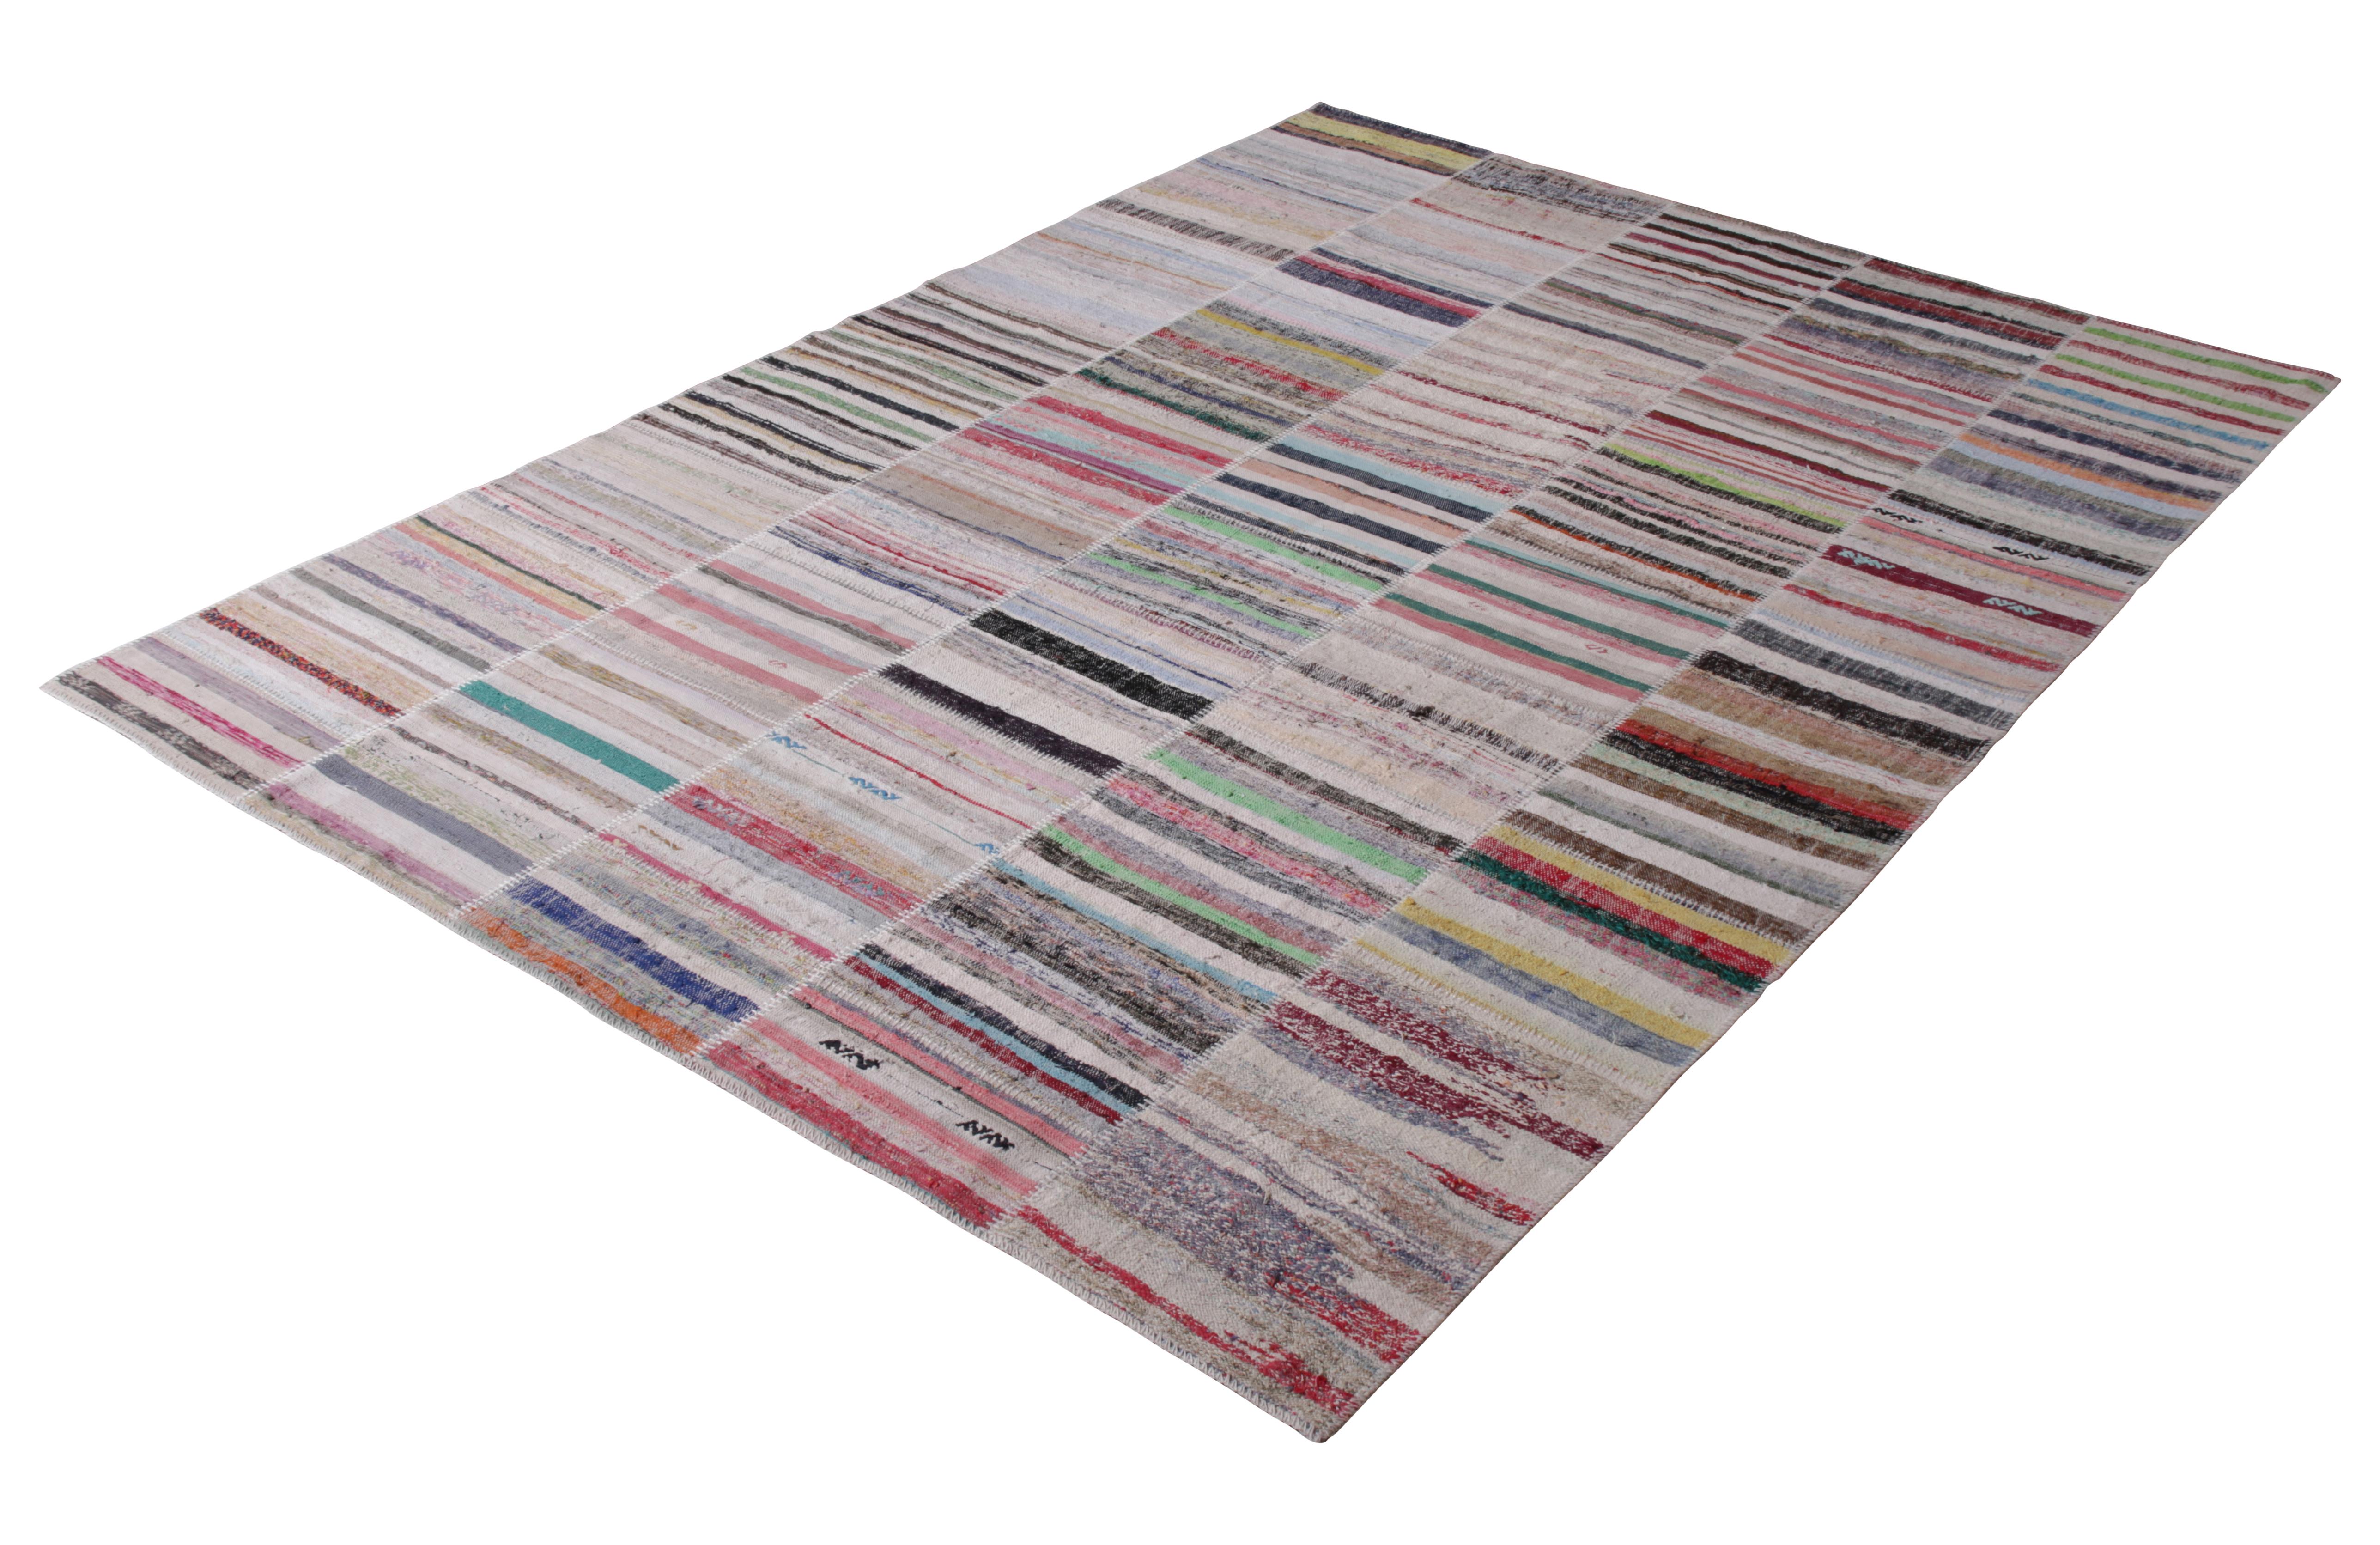 Handwoven in a wool flat-weave utilizing vintage yarns, this modern Kilim rug from Rug & Kilim’s Patchwork Kilim rug collection marries inspiration from midcentury flat-weave rugs with a whimsical spectrum of red, blue, pink, green, and other